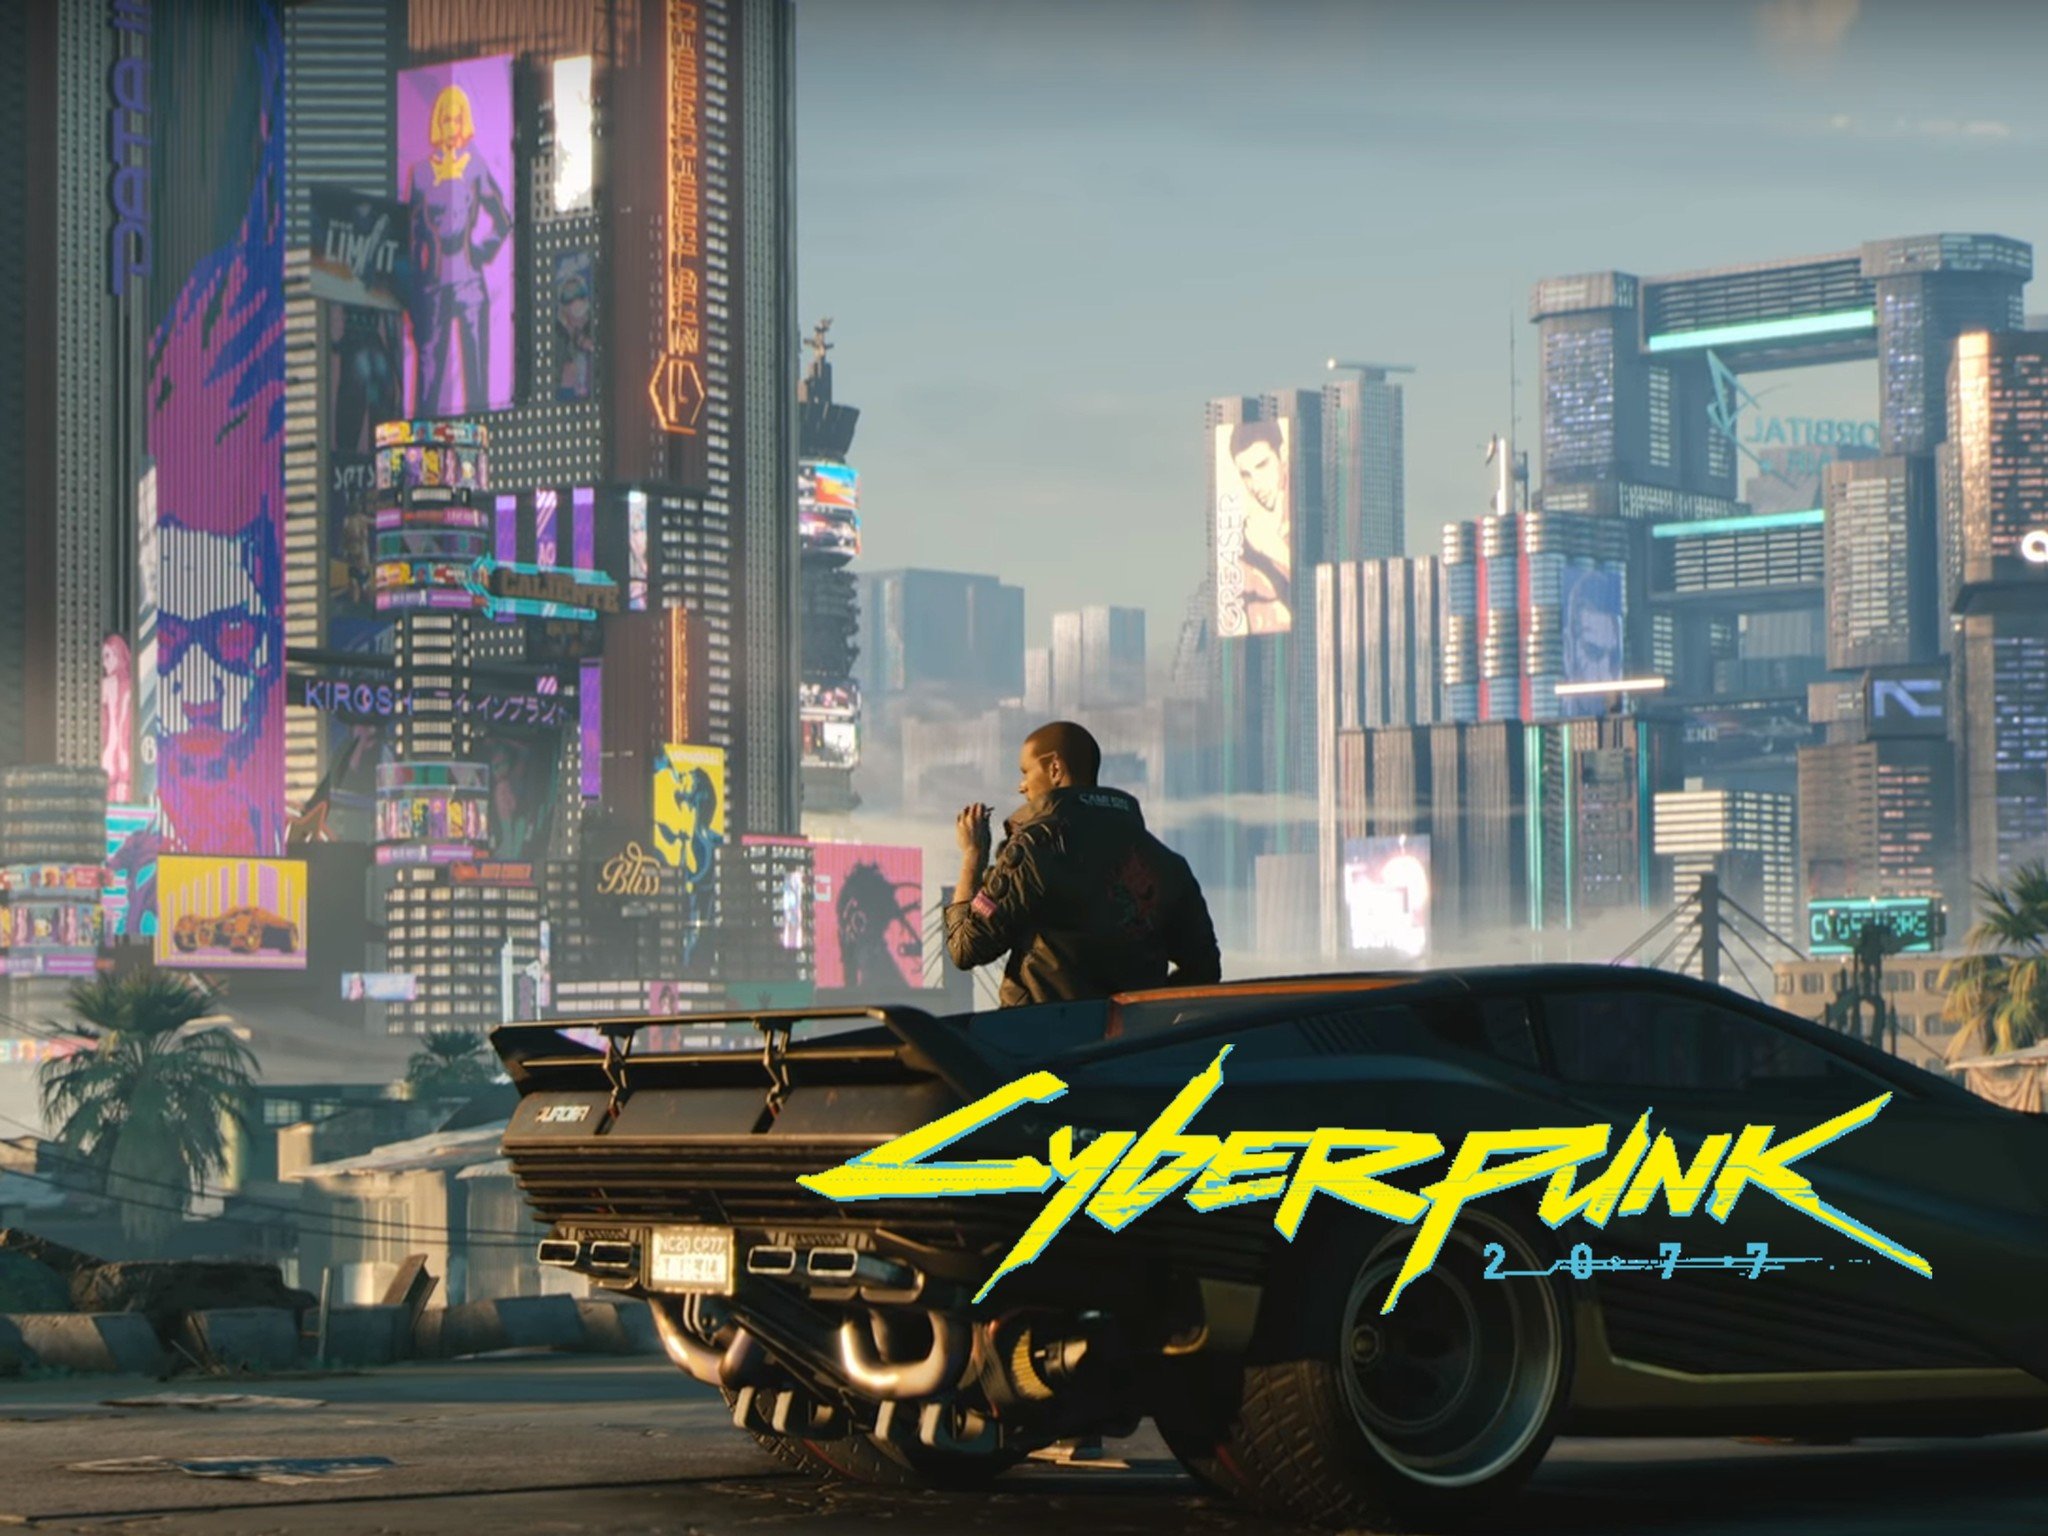 https://www.androidcentral.com/sites/androidcentral.com/files/styles/xlarge/public/article_images/2018/06/ps4-cyberpunk-00.jpg?itok=PH8b7t9W